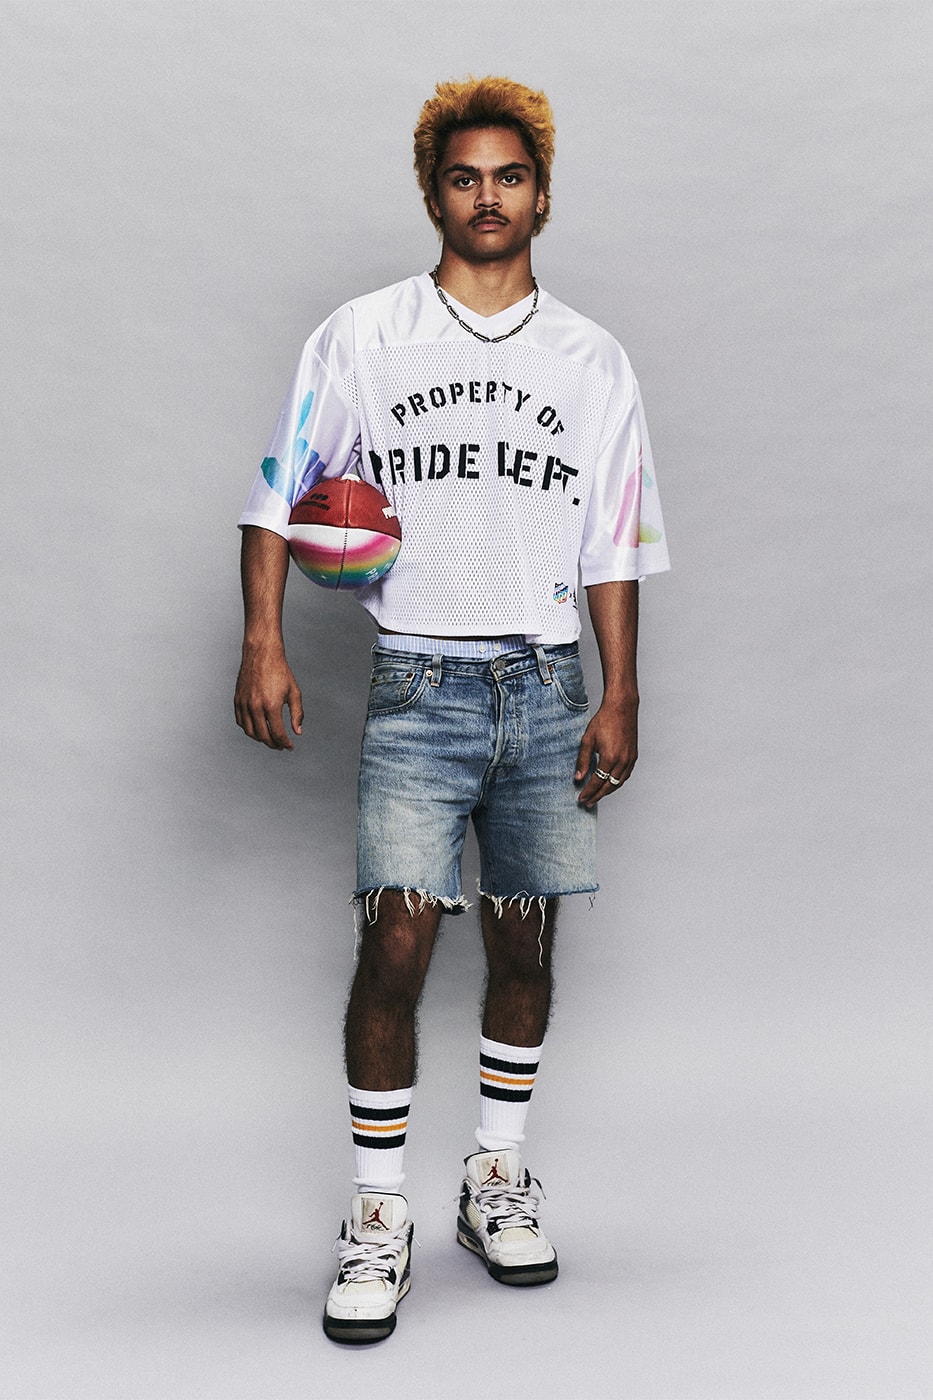 NFL Launches Pride Month Capsule With Humberto Leon release info openeing ceremony national football league american football new era caps merch gay lesbian transgender lgbtqia